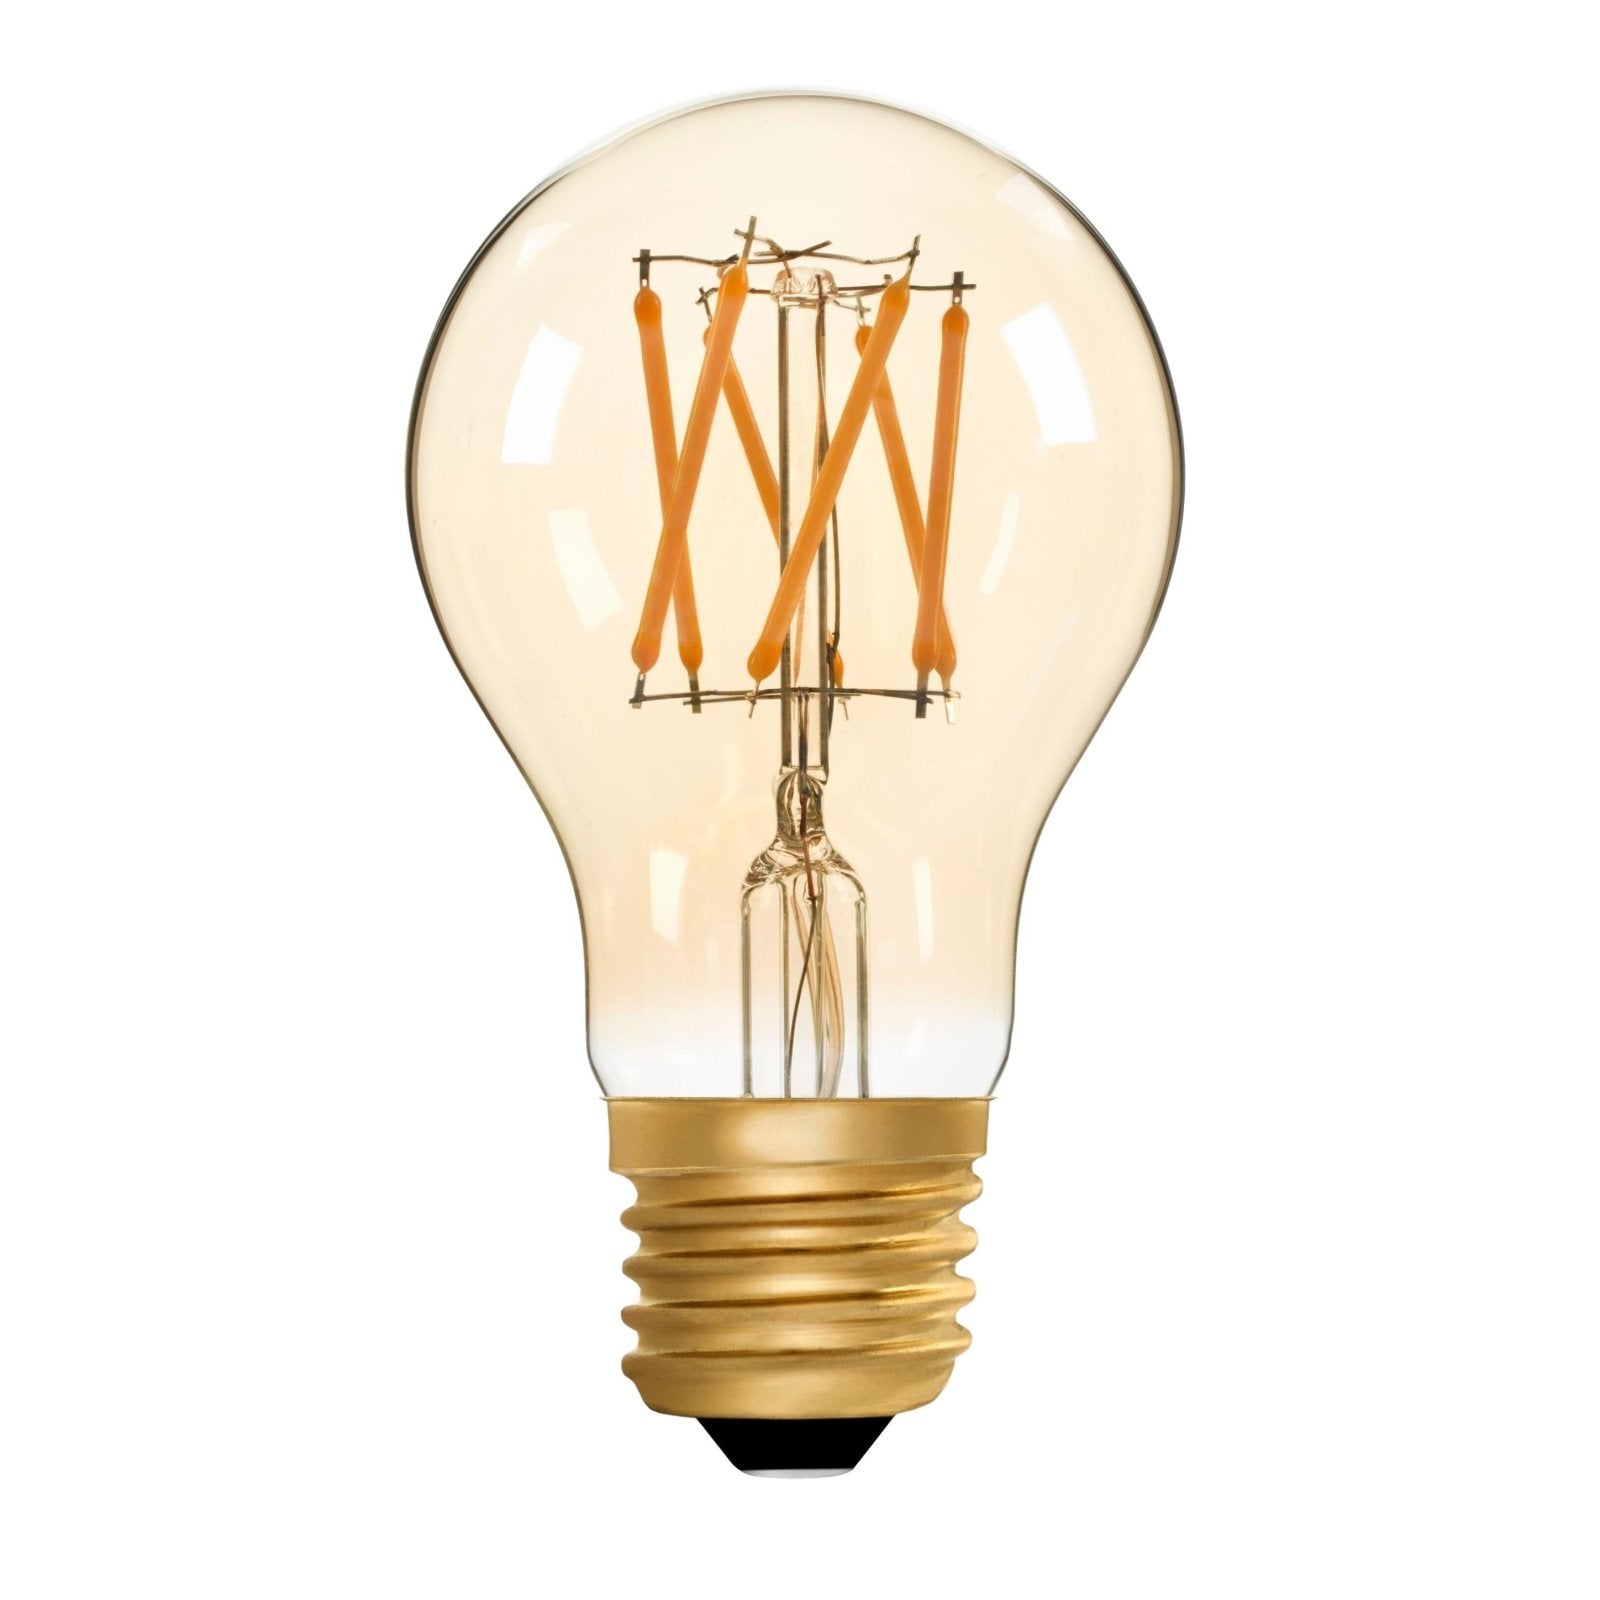 GLS A60 Amber 4W E27 2200K - LED Lamp from RETROLIGHT. Made by Zico Lighting.